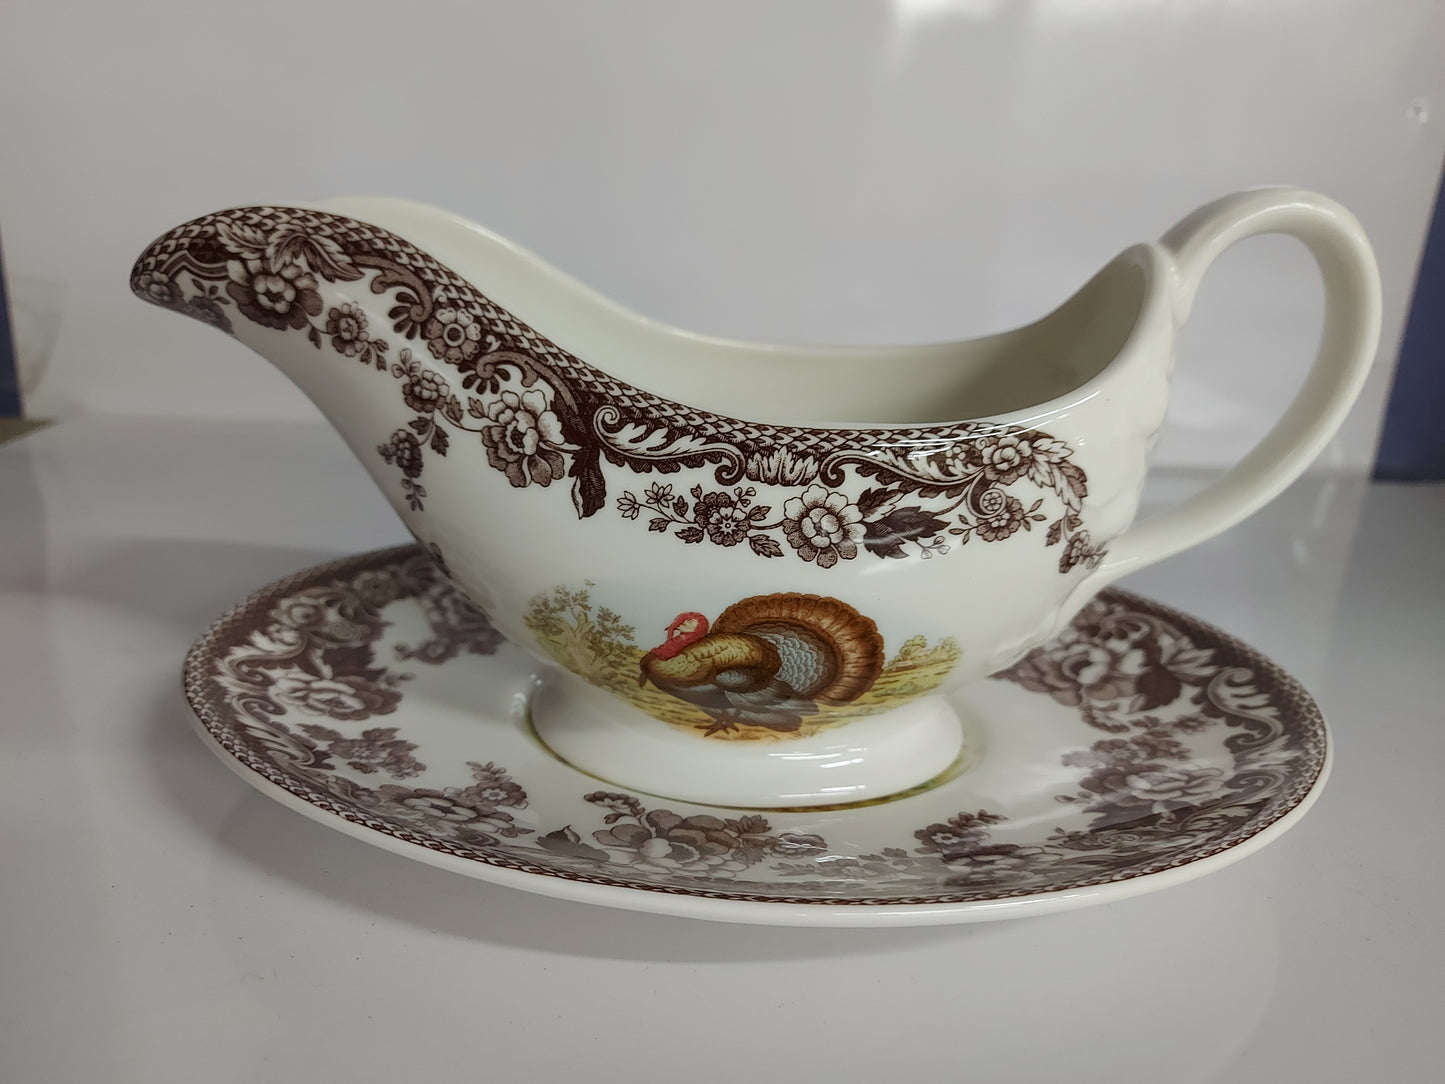 Spode Woodland Sauceboat And Stand- Turkey Design- PRICE CUT!!!